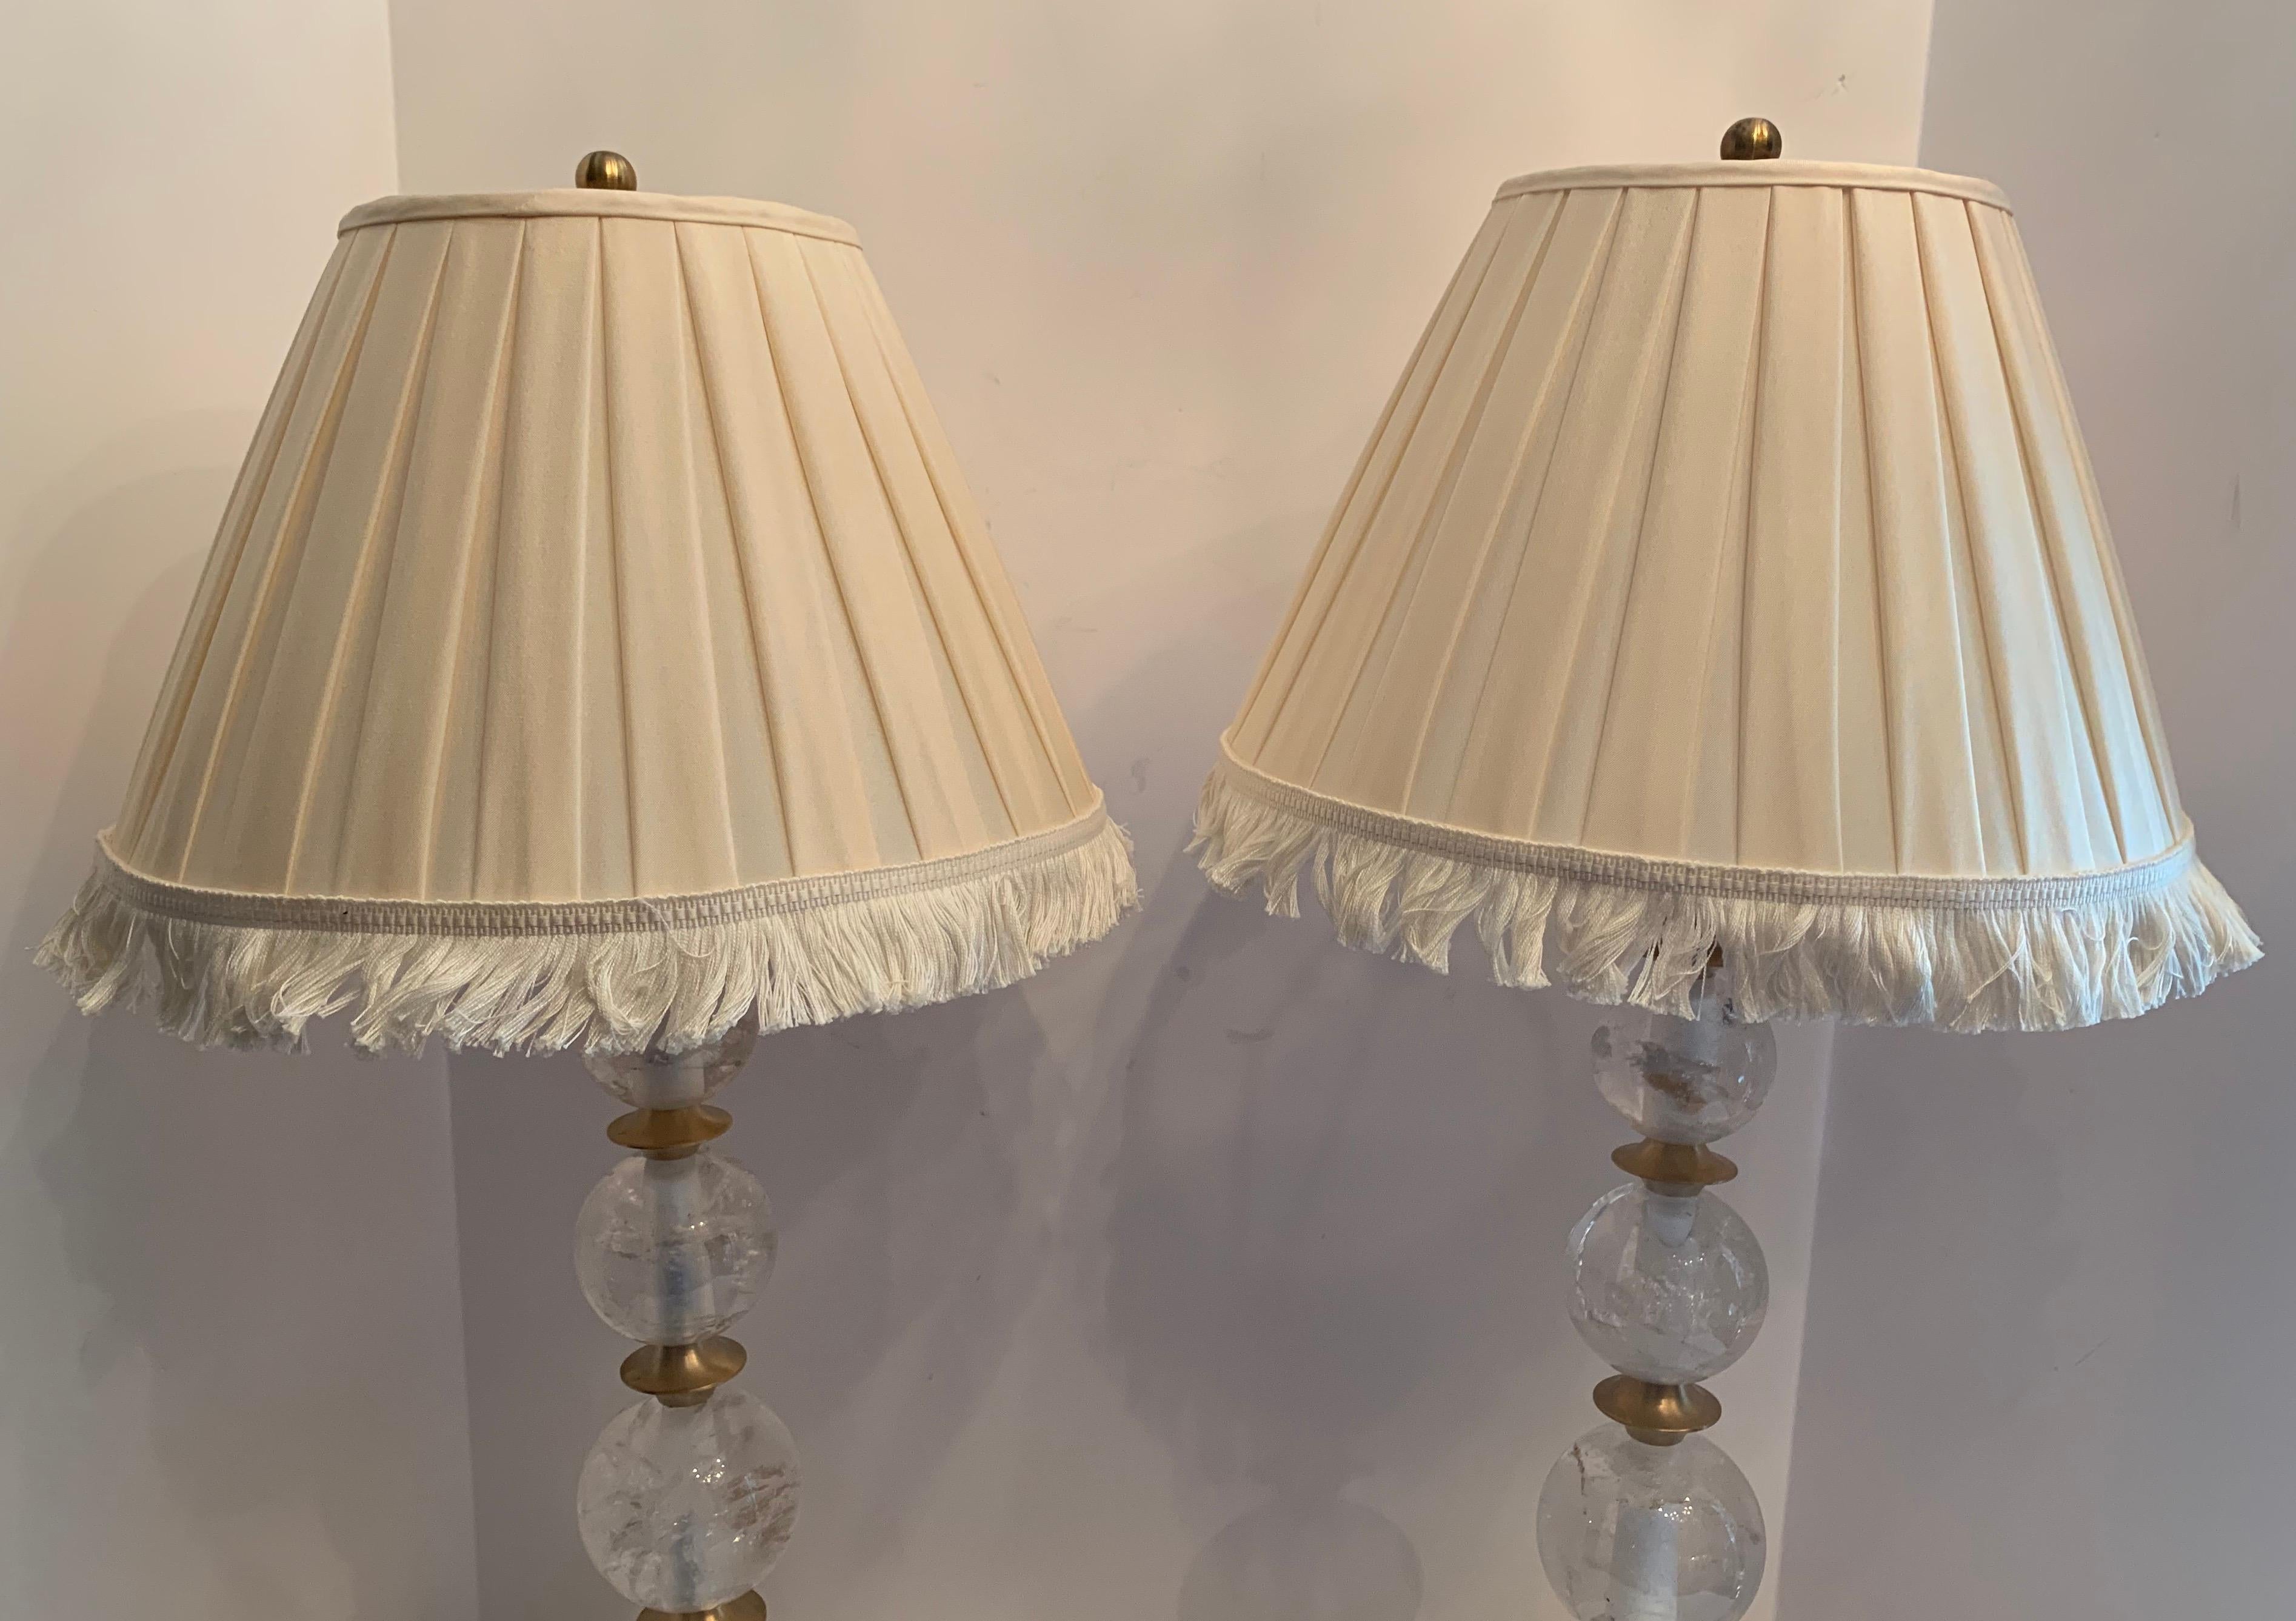 A wonderful pair of Mid-Century Modern rock crystal stack ball form and brushed bronze lamps by Vaughan
Wiring Is UL listed and up to date
Accompanied by lamp shades, 12